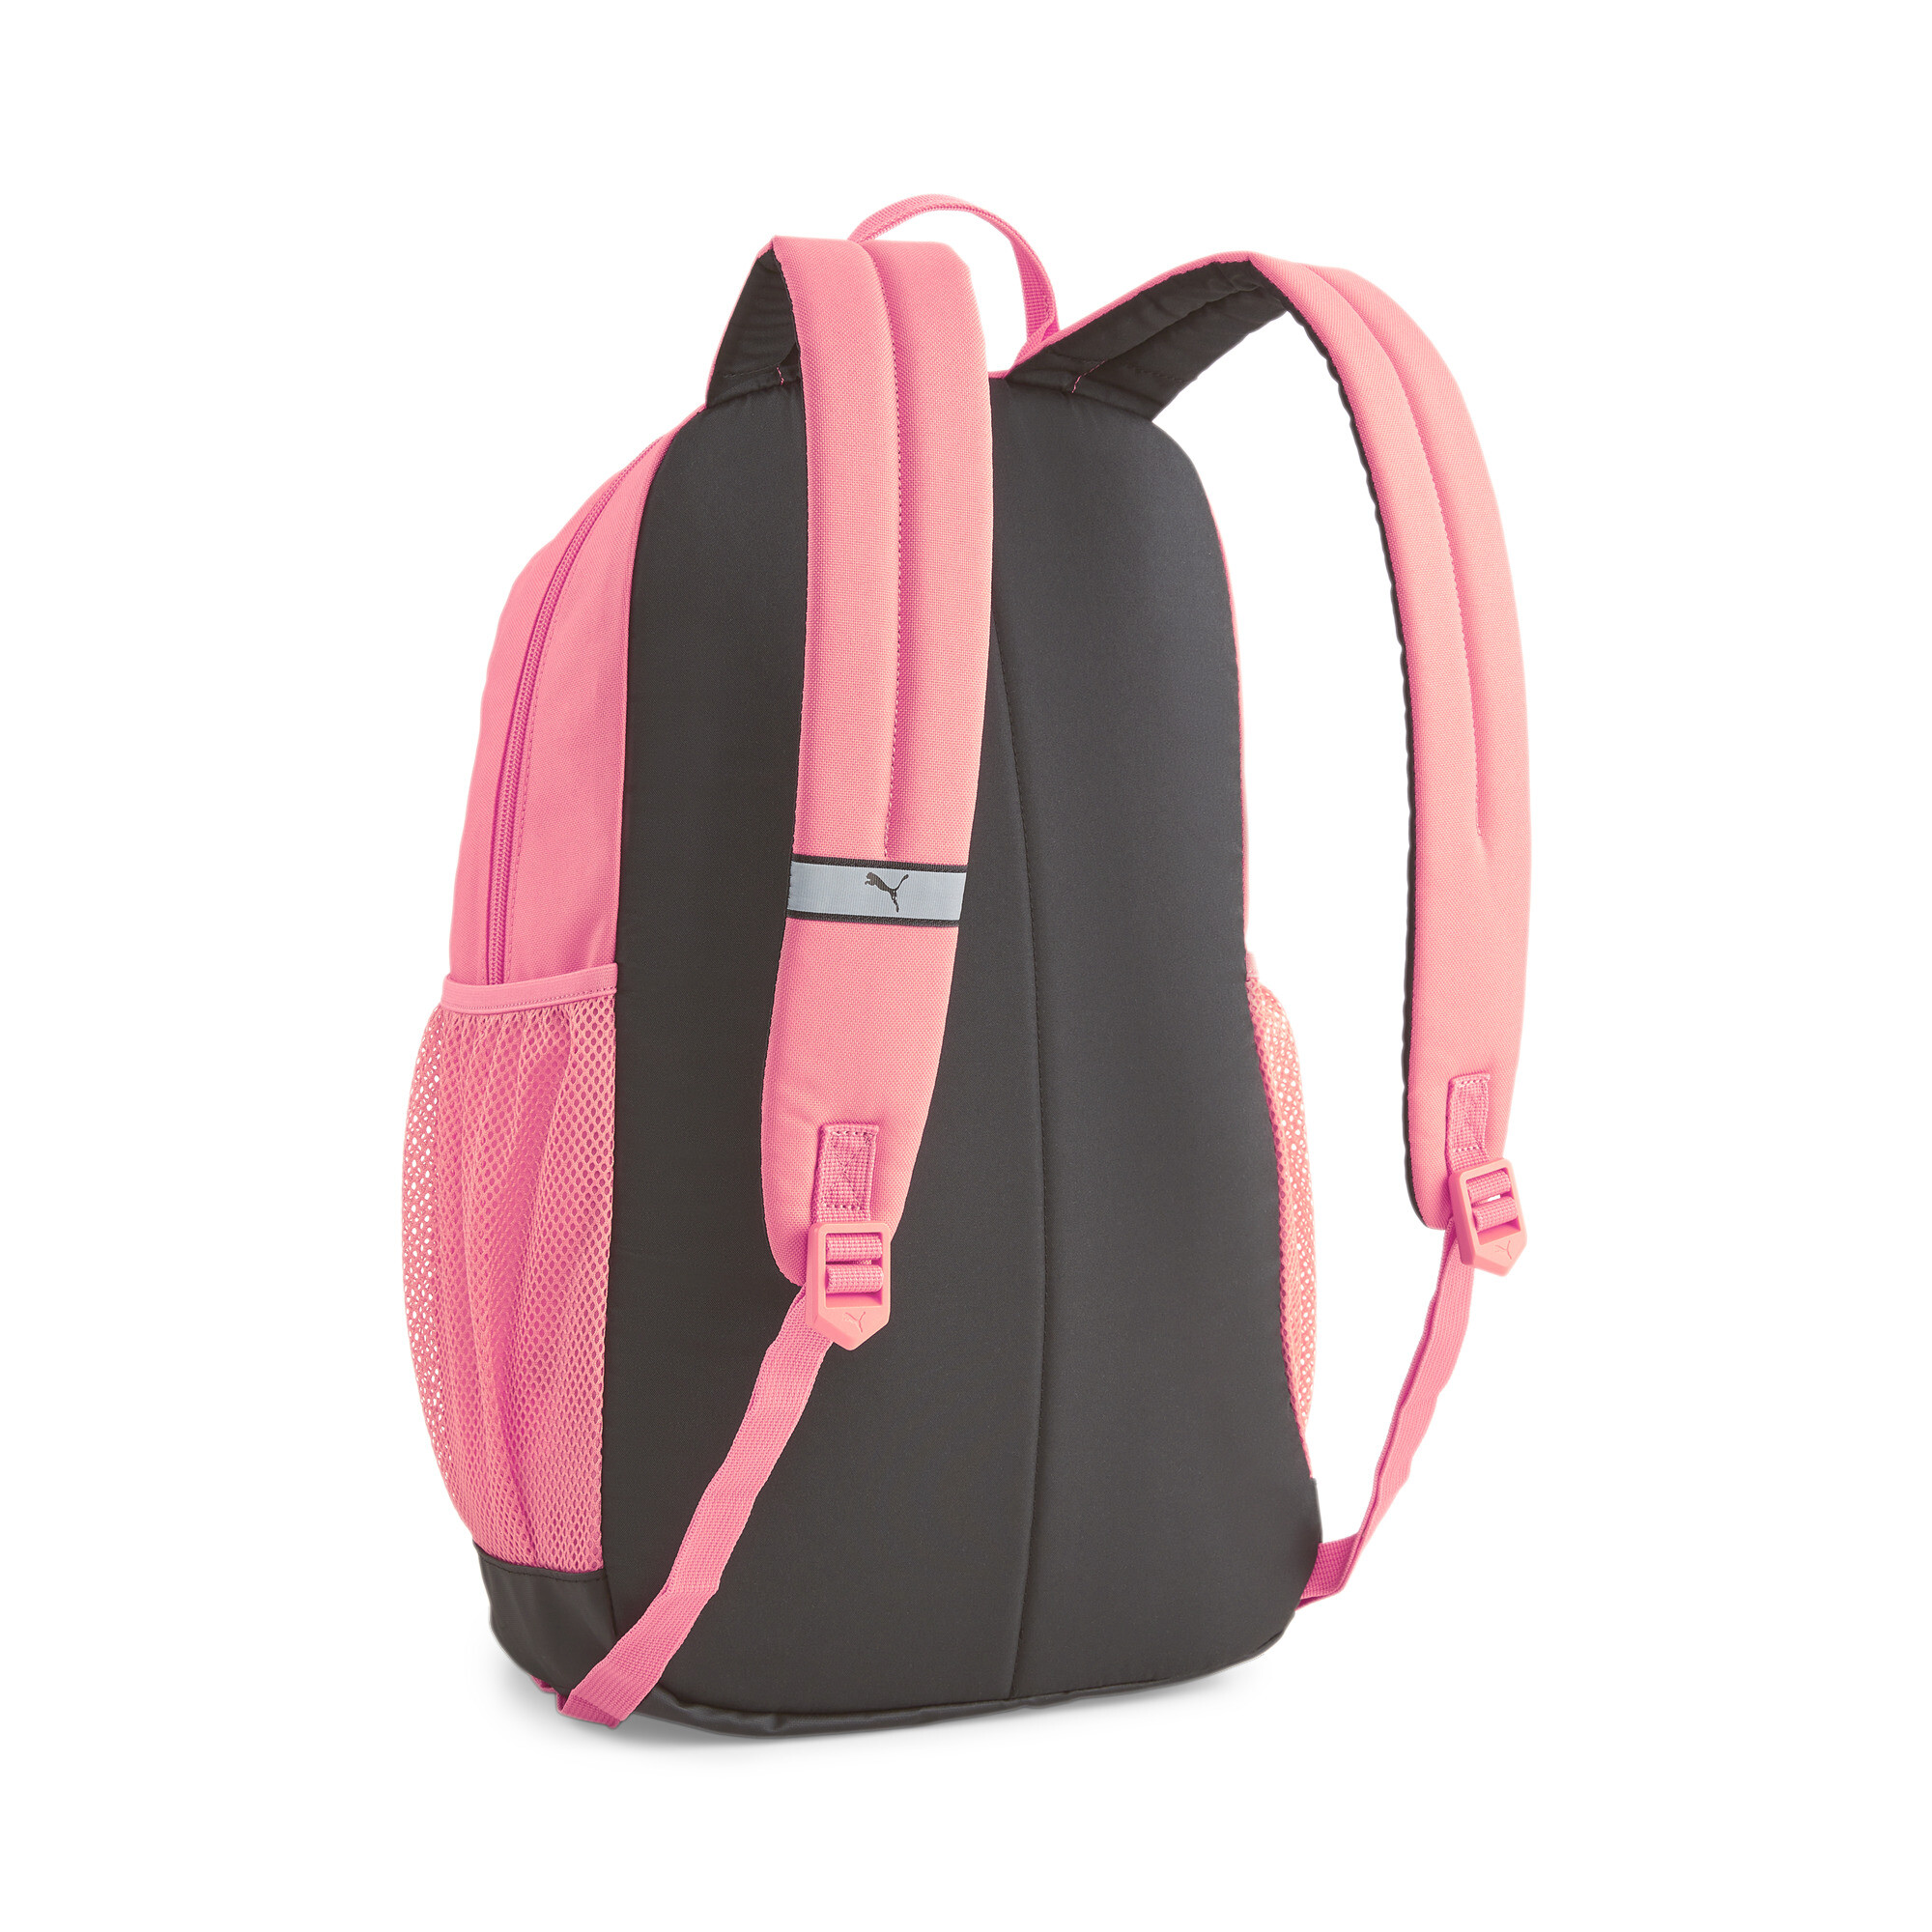 Puma Plus Backpack, Pink, Accessories